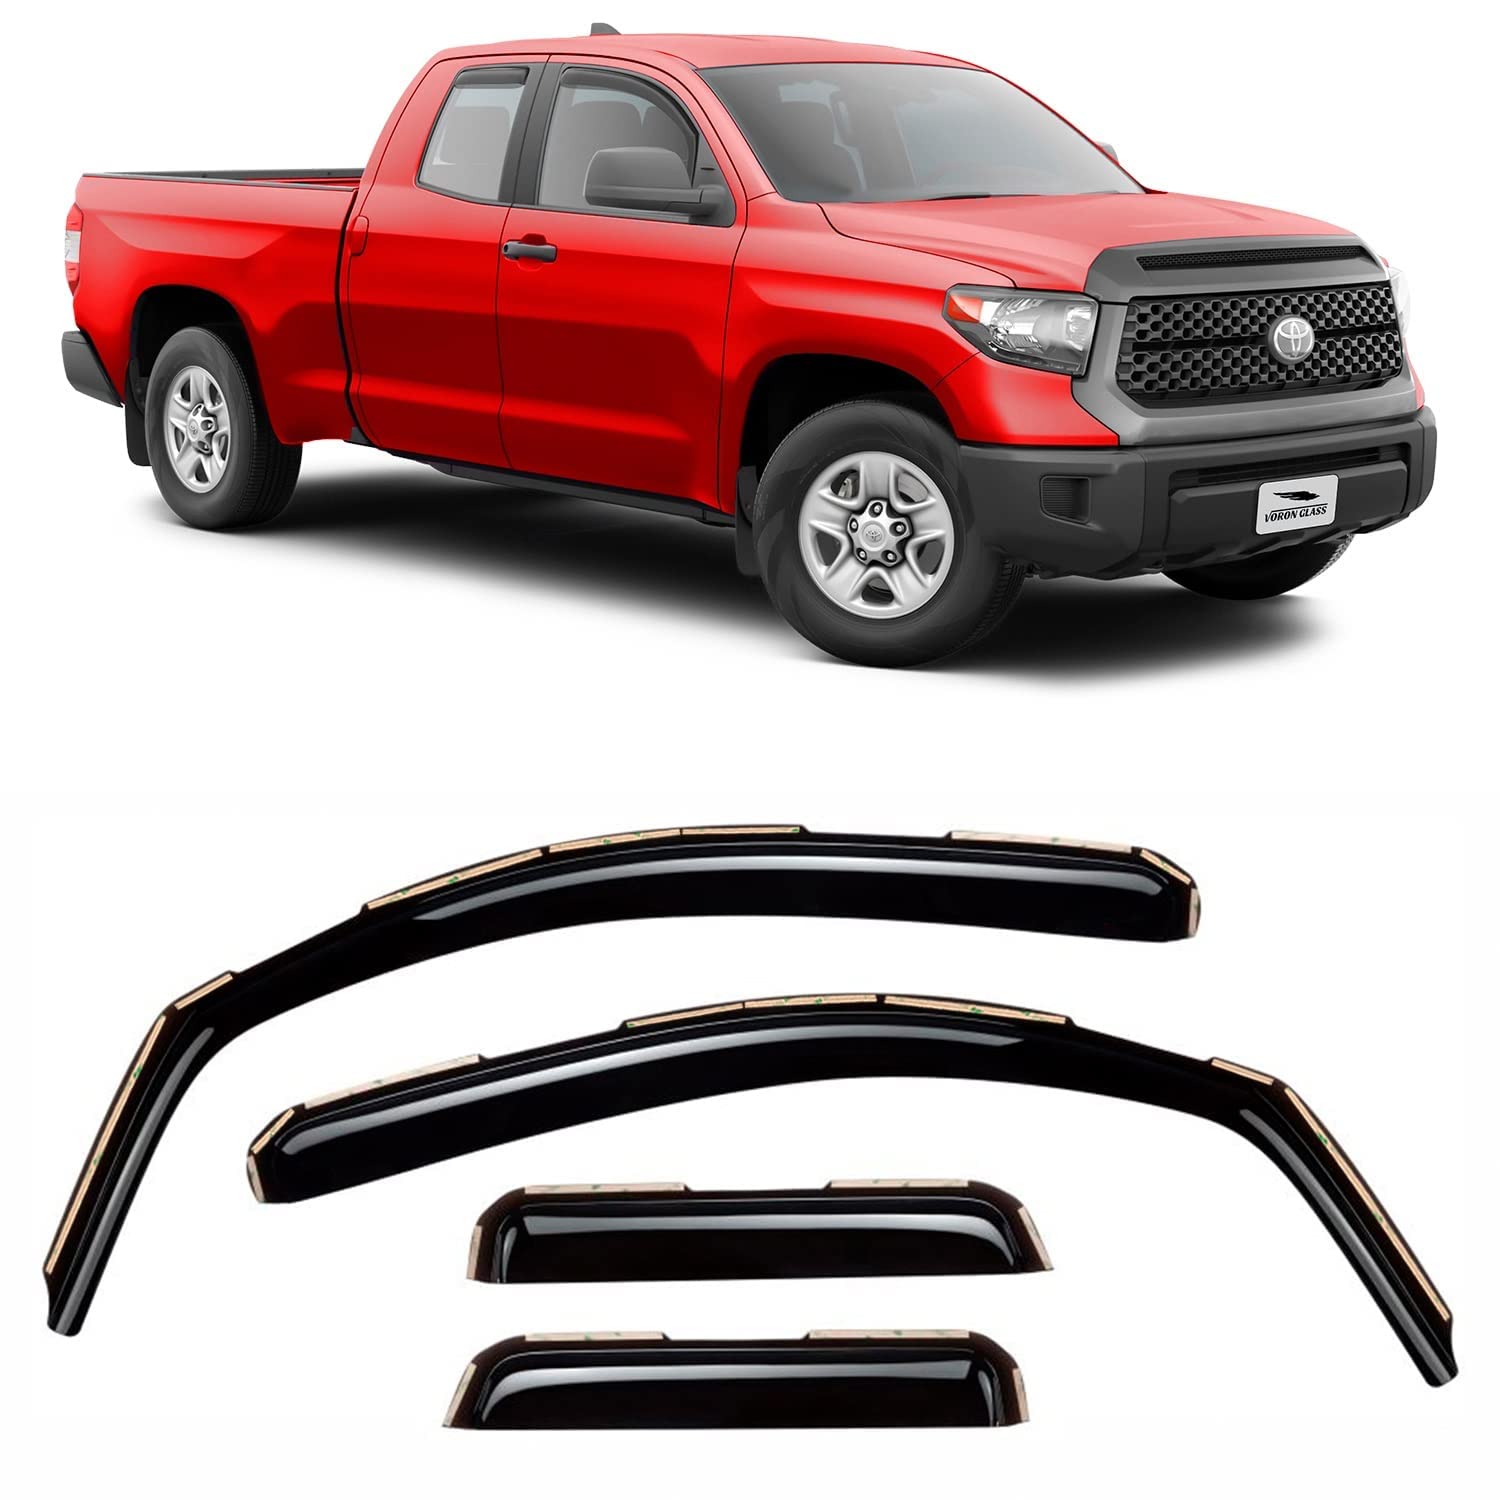 Voron glass in-channel Extra Durable Rain guards for Trucks Toyota Tundra 2007-2021 Double cab, Window Deflectors, Vent Window V